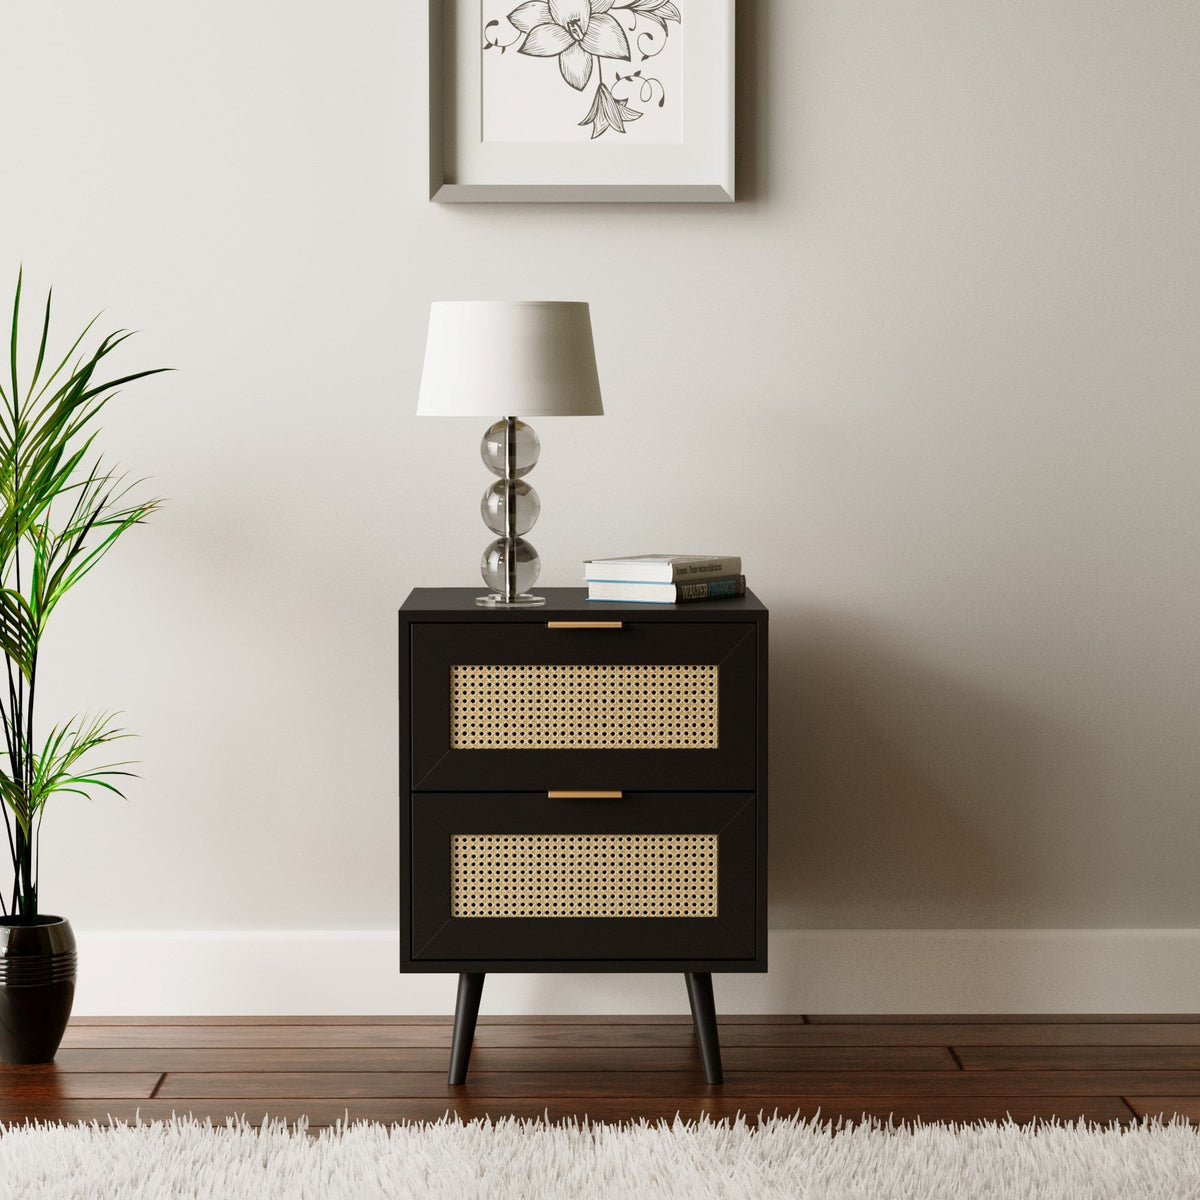 Rian 2 Drawer Bedside Cabinet Table - Black With Natural Cane Front Casa Maria Designs 